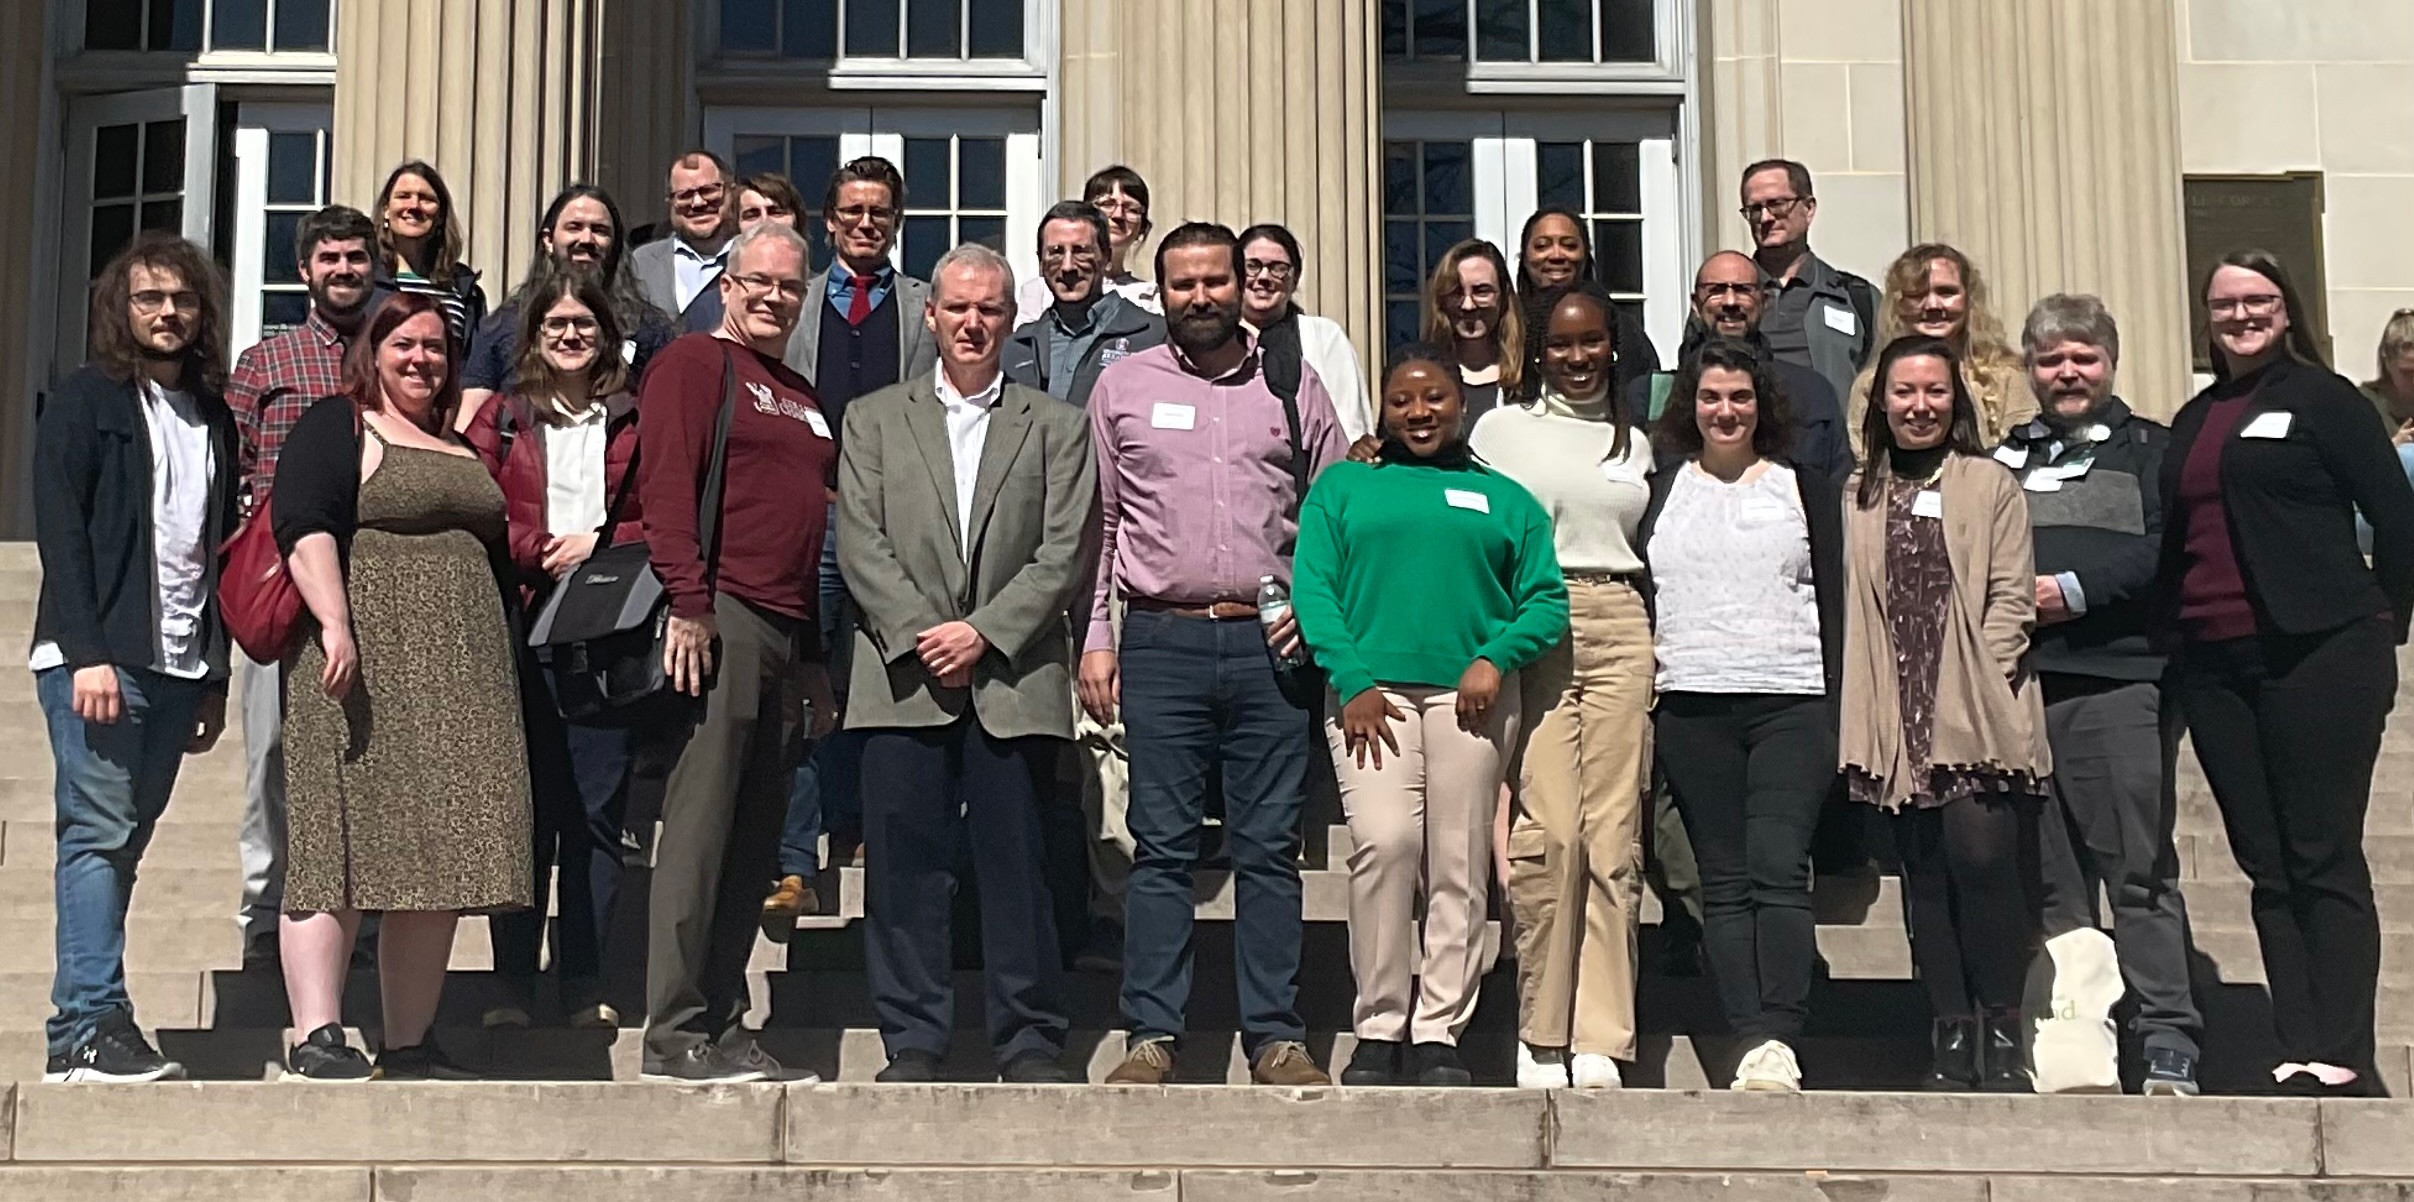 Attendees at the Southeastern German Studies Conference standing on the steps of Gorgas Library.